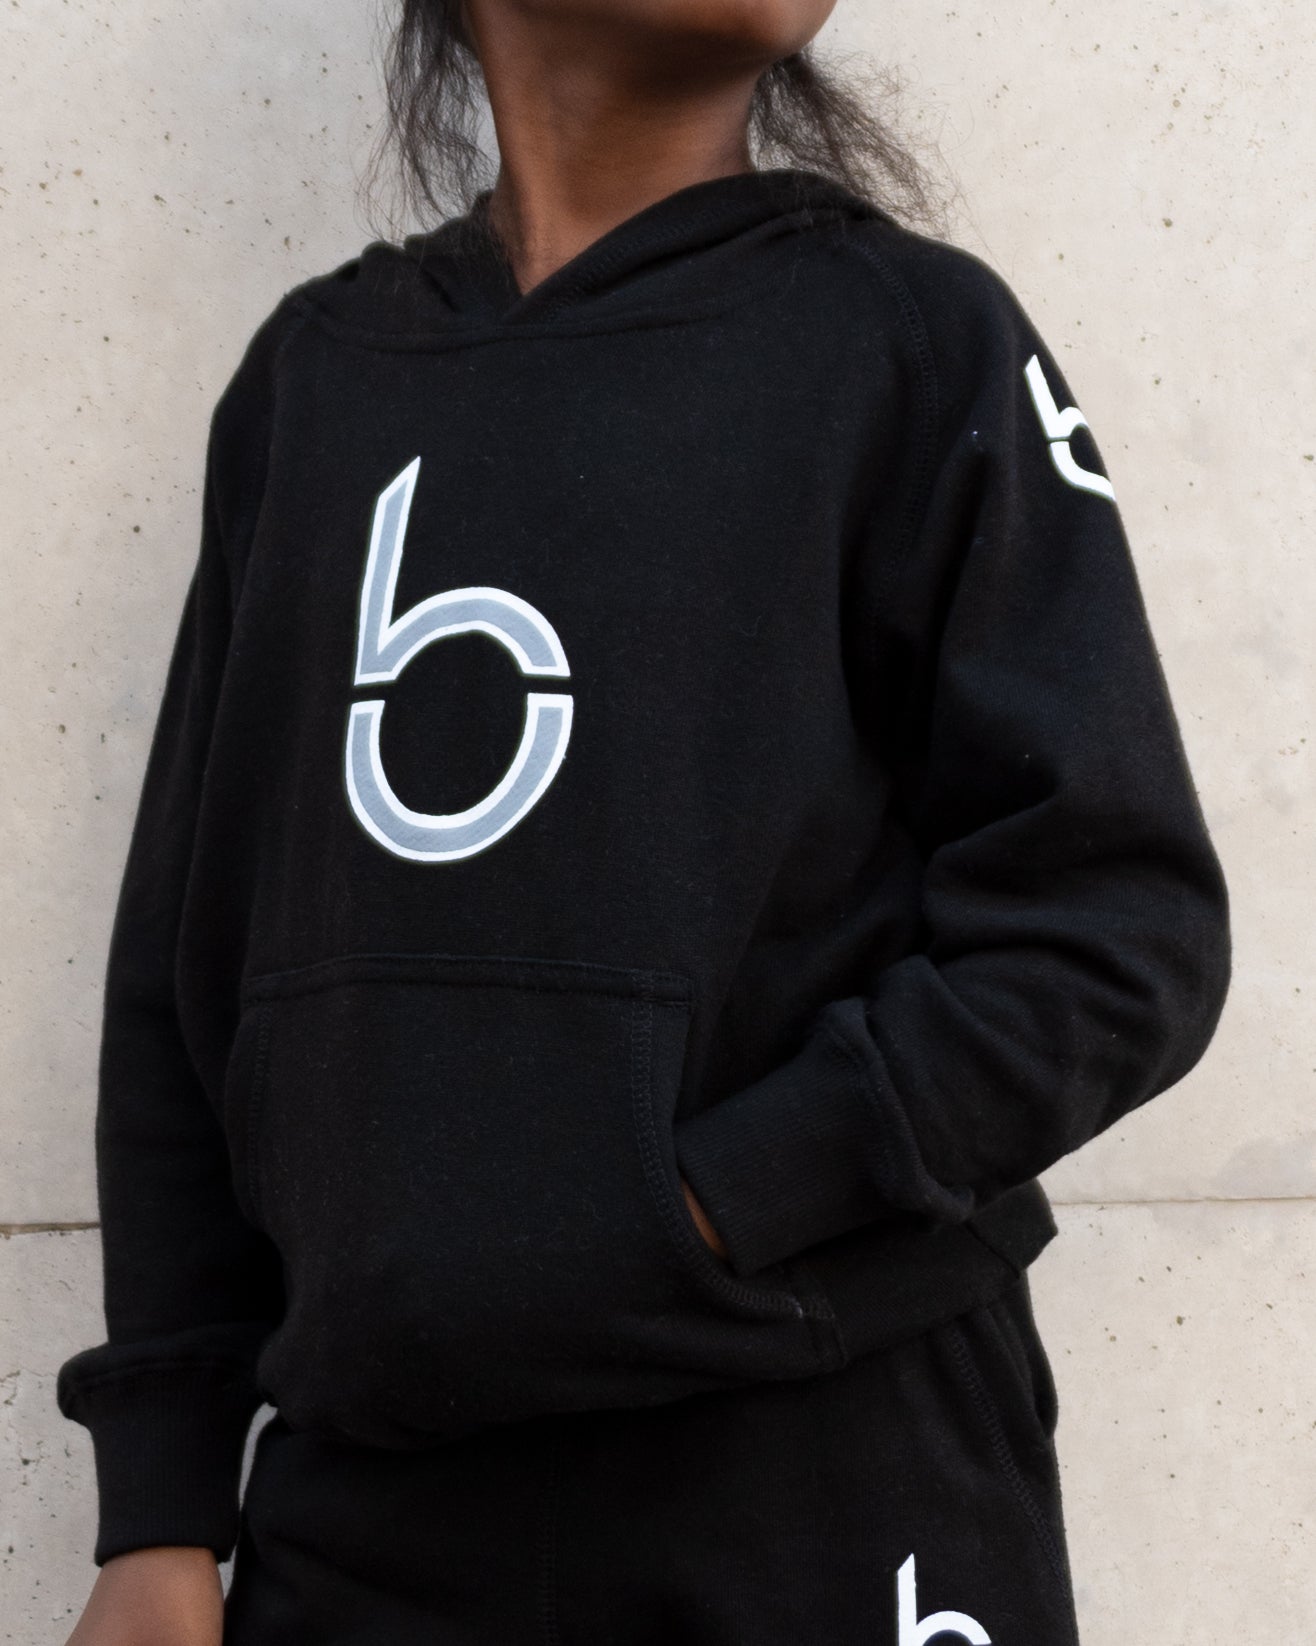 Youth Signature Hoodie